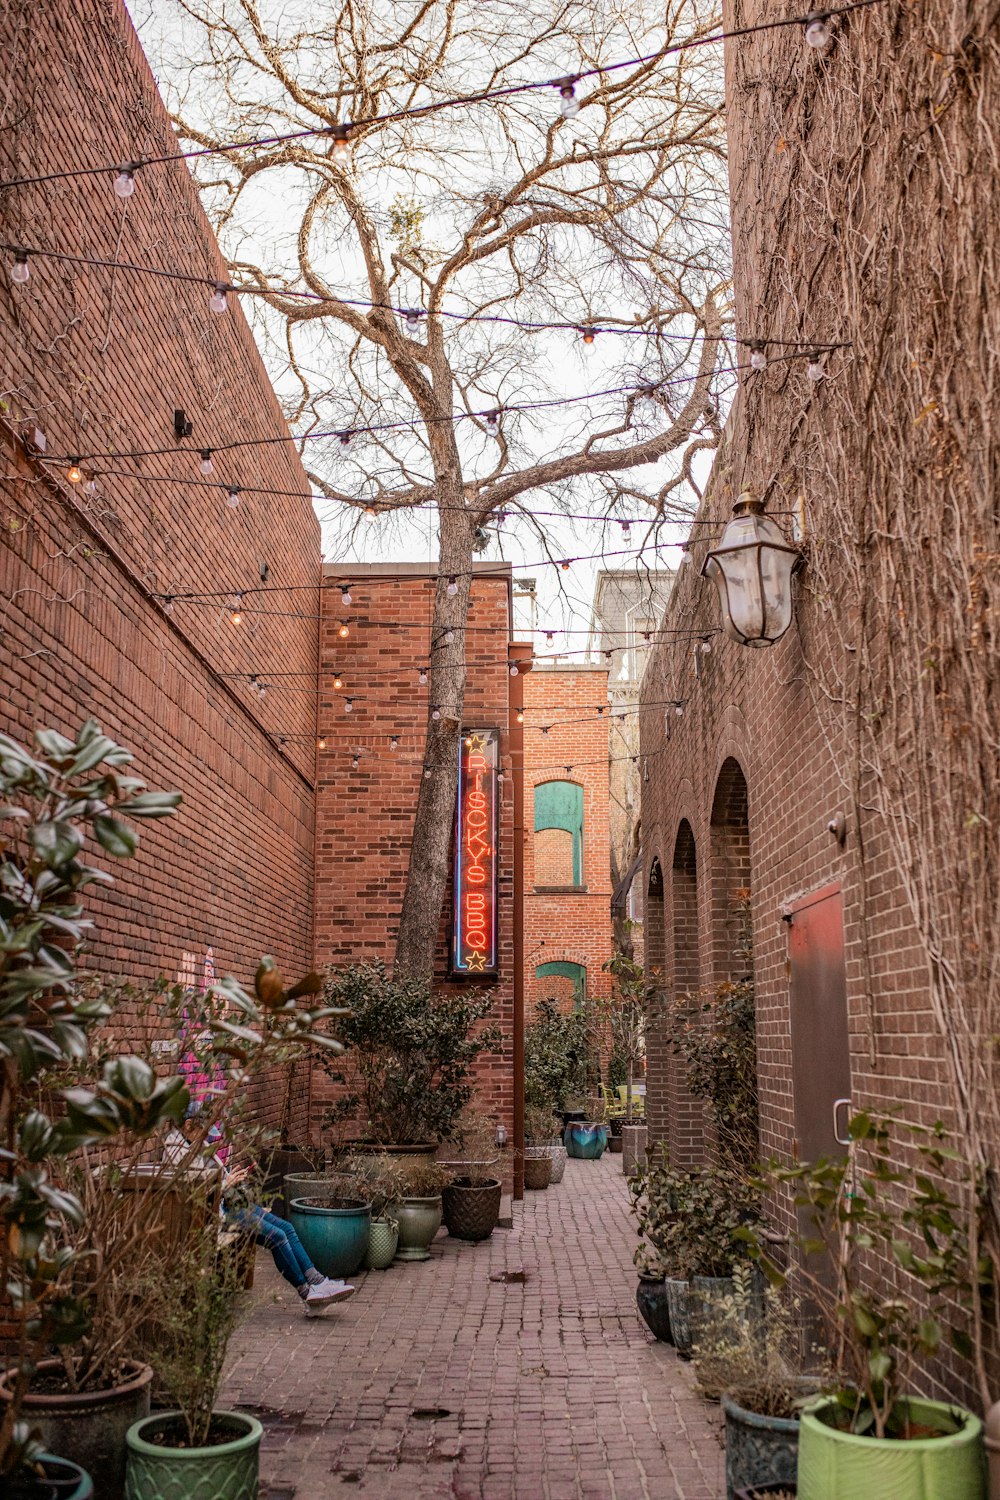 a narrow alley way with potted plants and trees